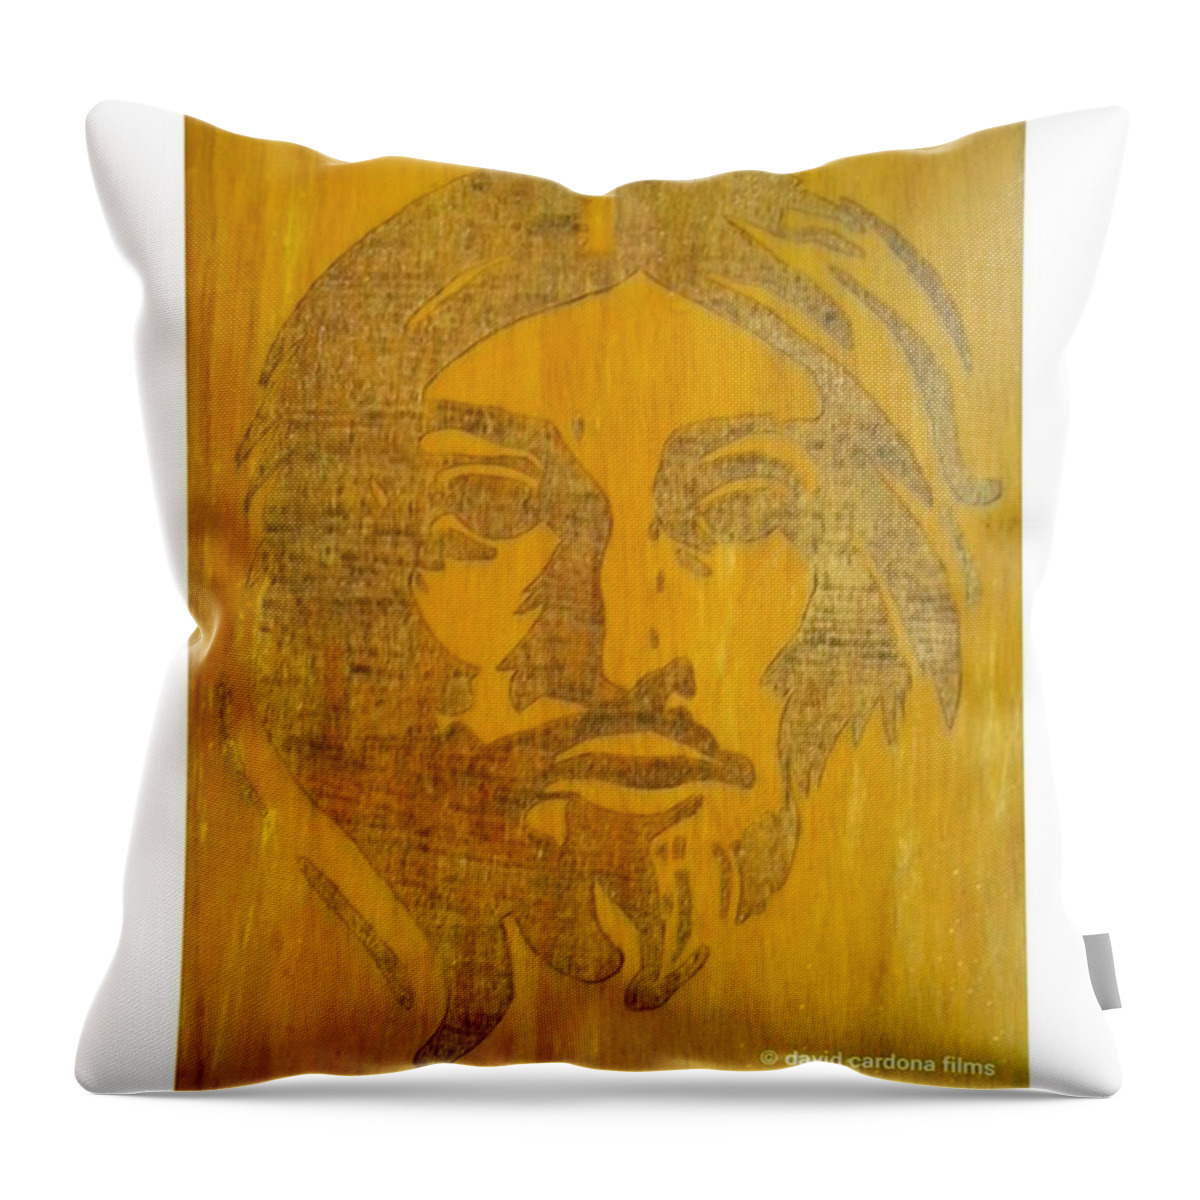 Colors Throw Pillow featuring the photograph Belifer
from
christmonth
by
david by David Cardona